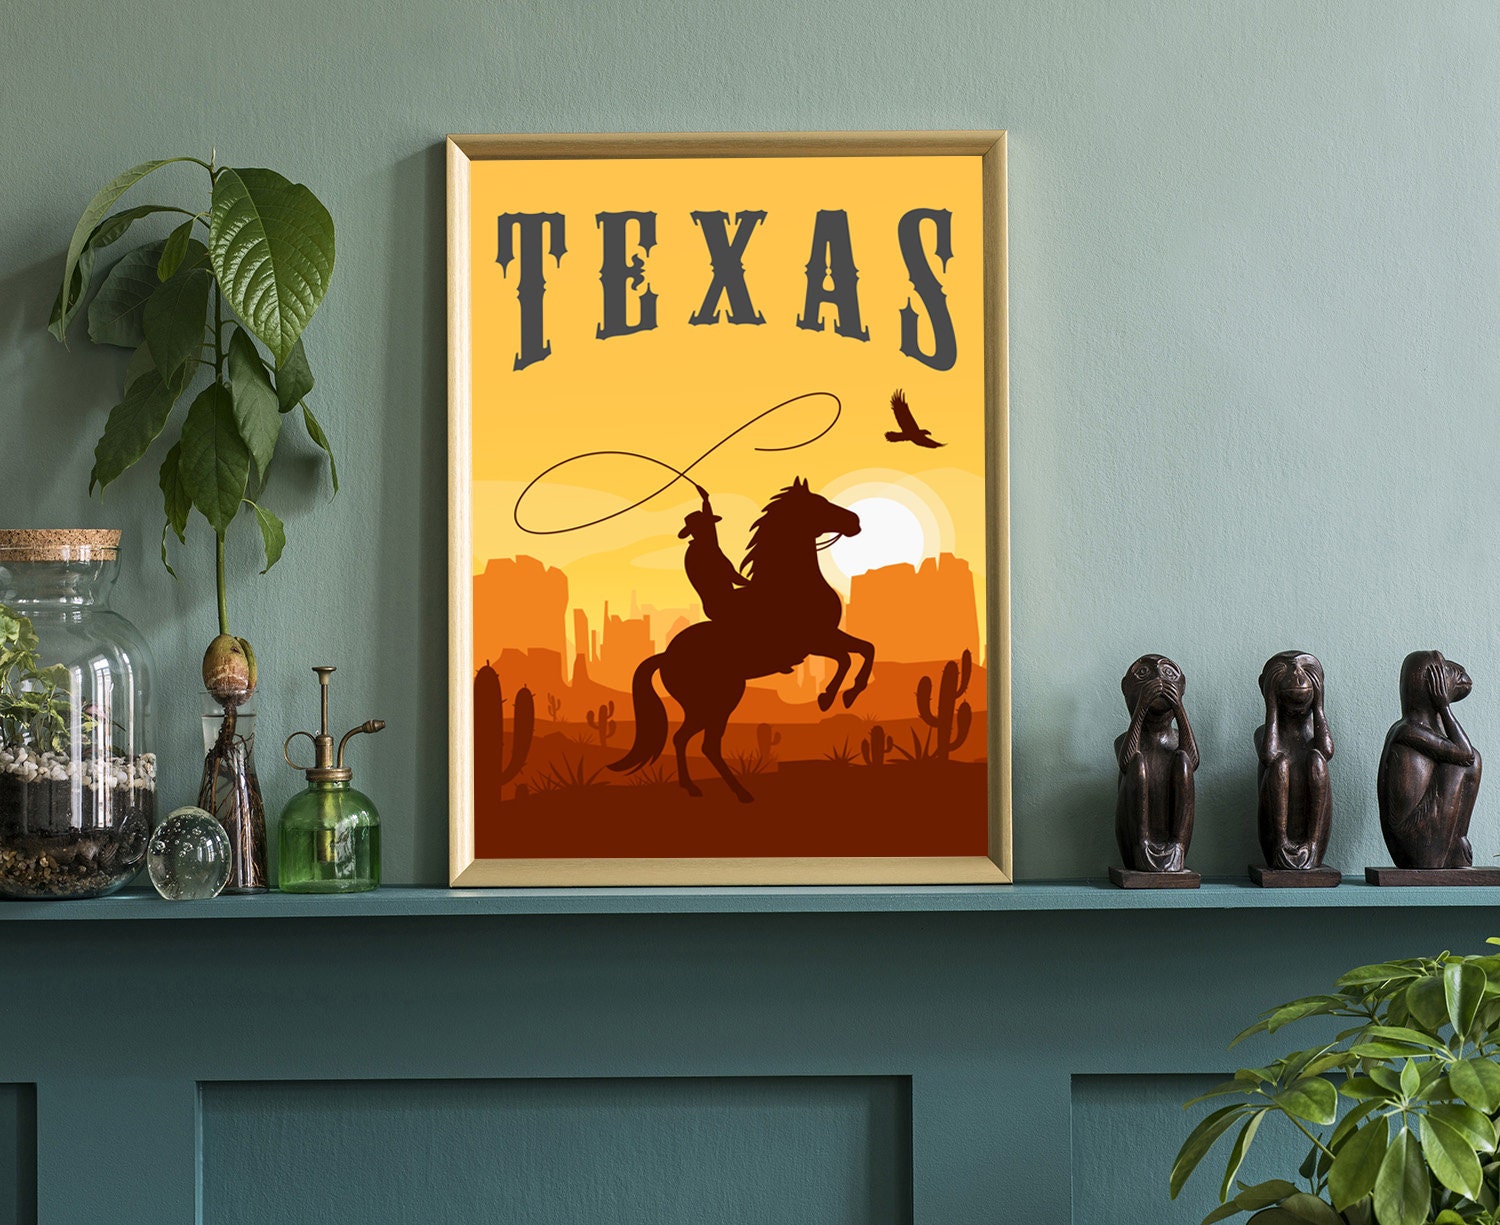 Retro Style Travel Poster, Texas Vintage Rustic Poster Print, Home Wall Art, Office Wall Decors, Posters, Texas, State Map Poster Prints